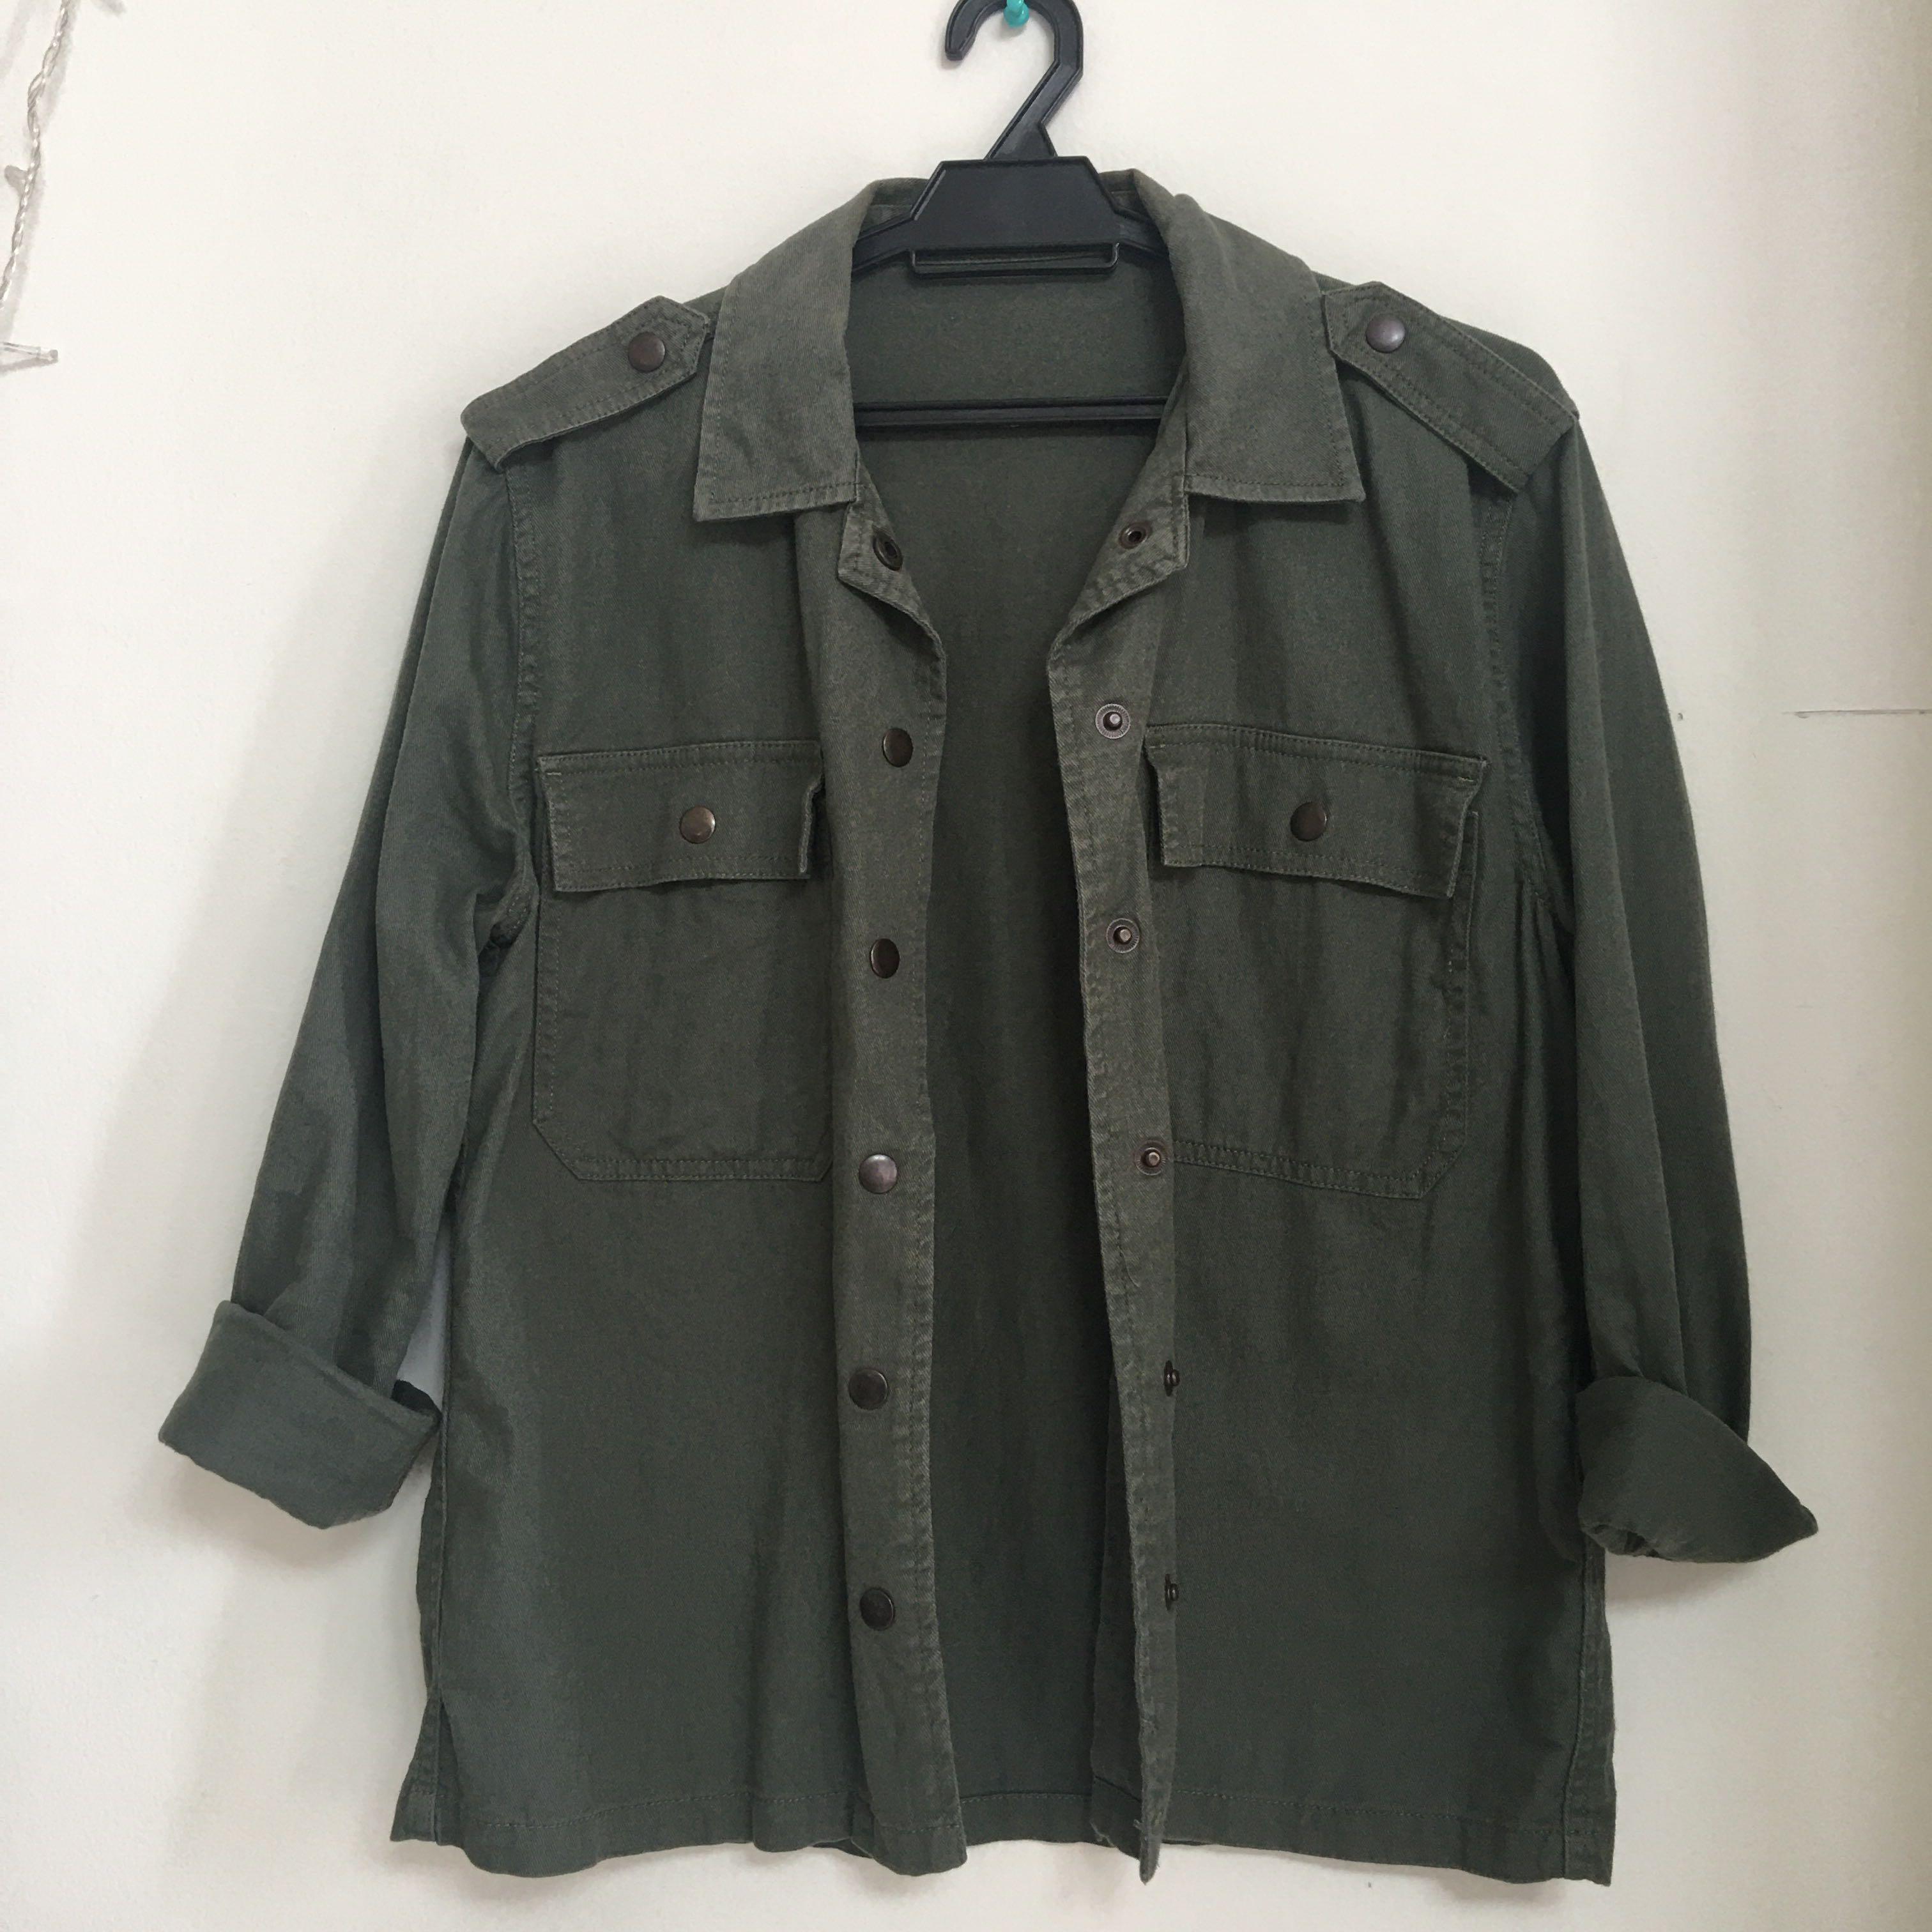 Green army jacket, Women's Fashion, Coats, Jackets and Outerwear on ...